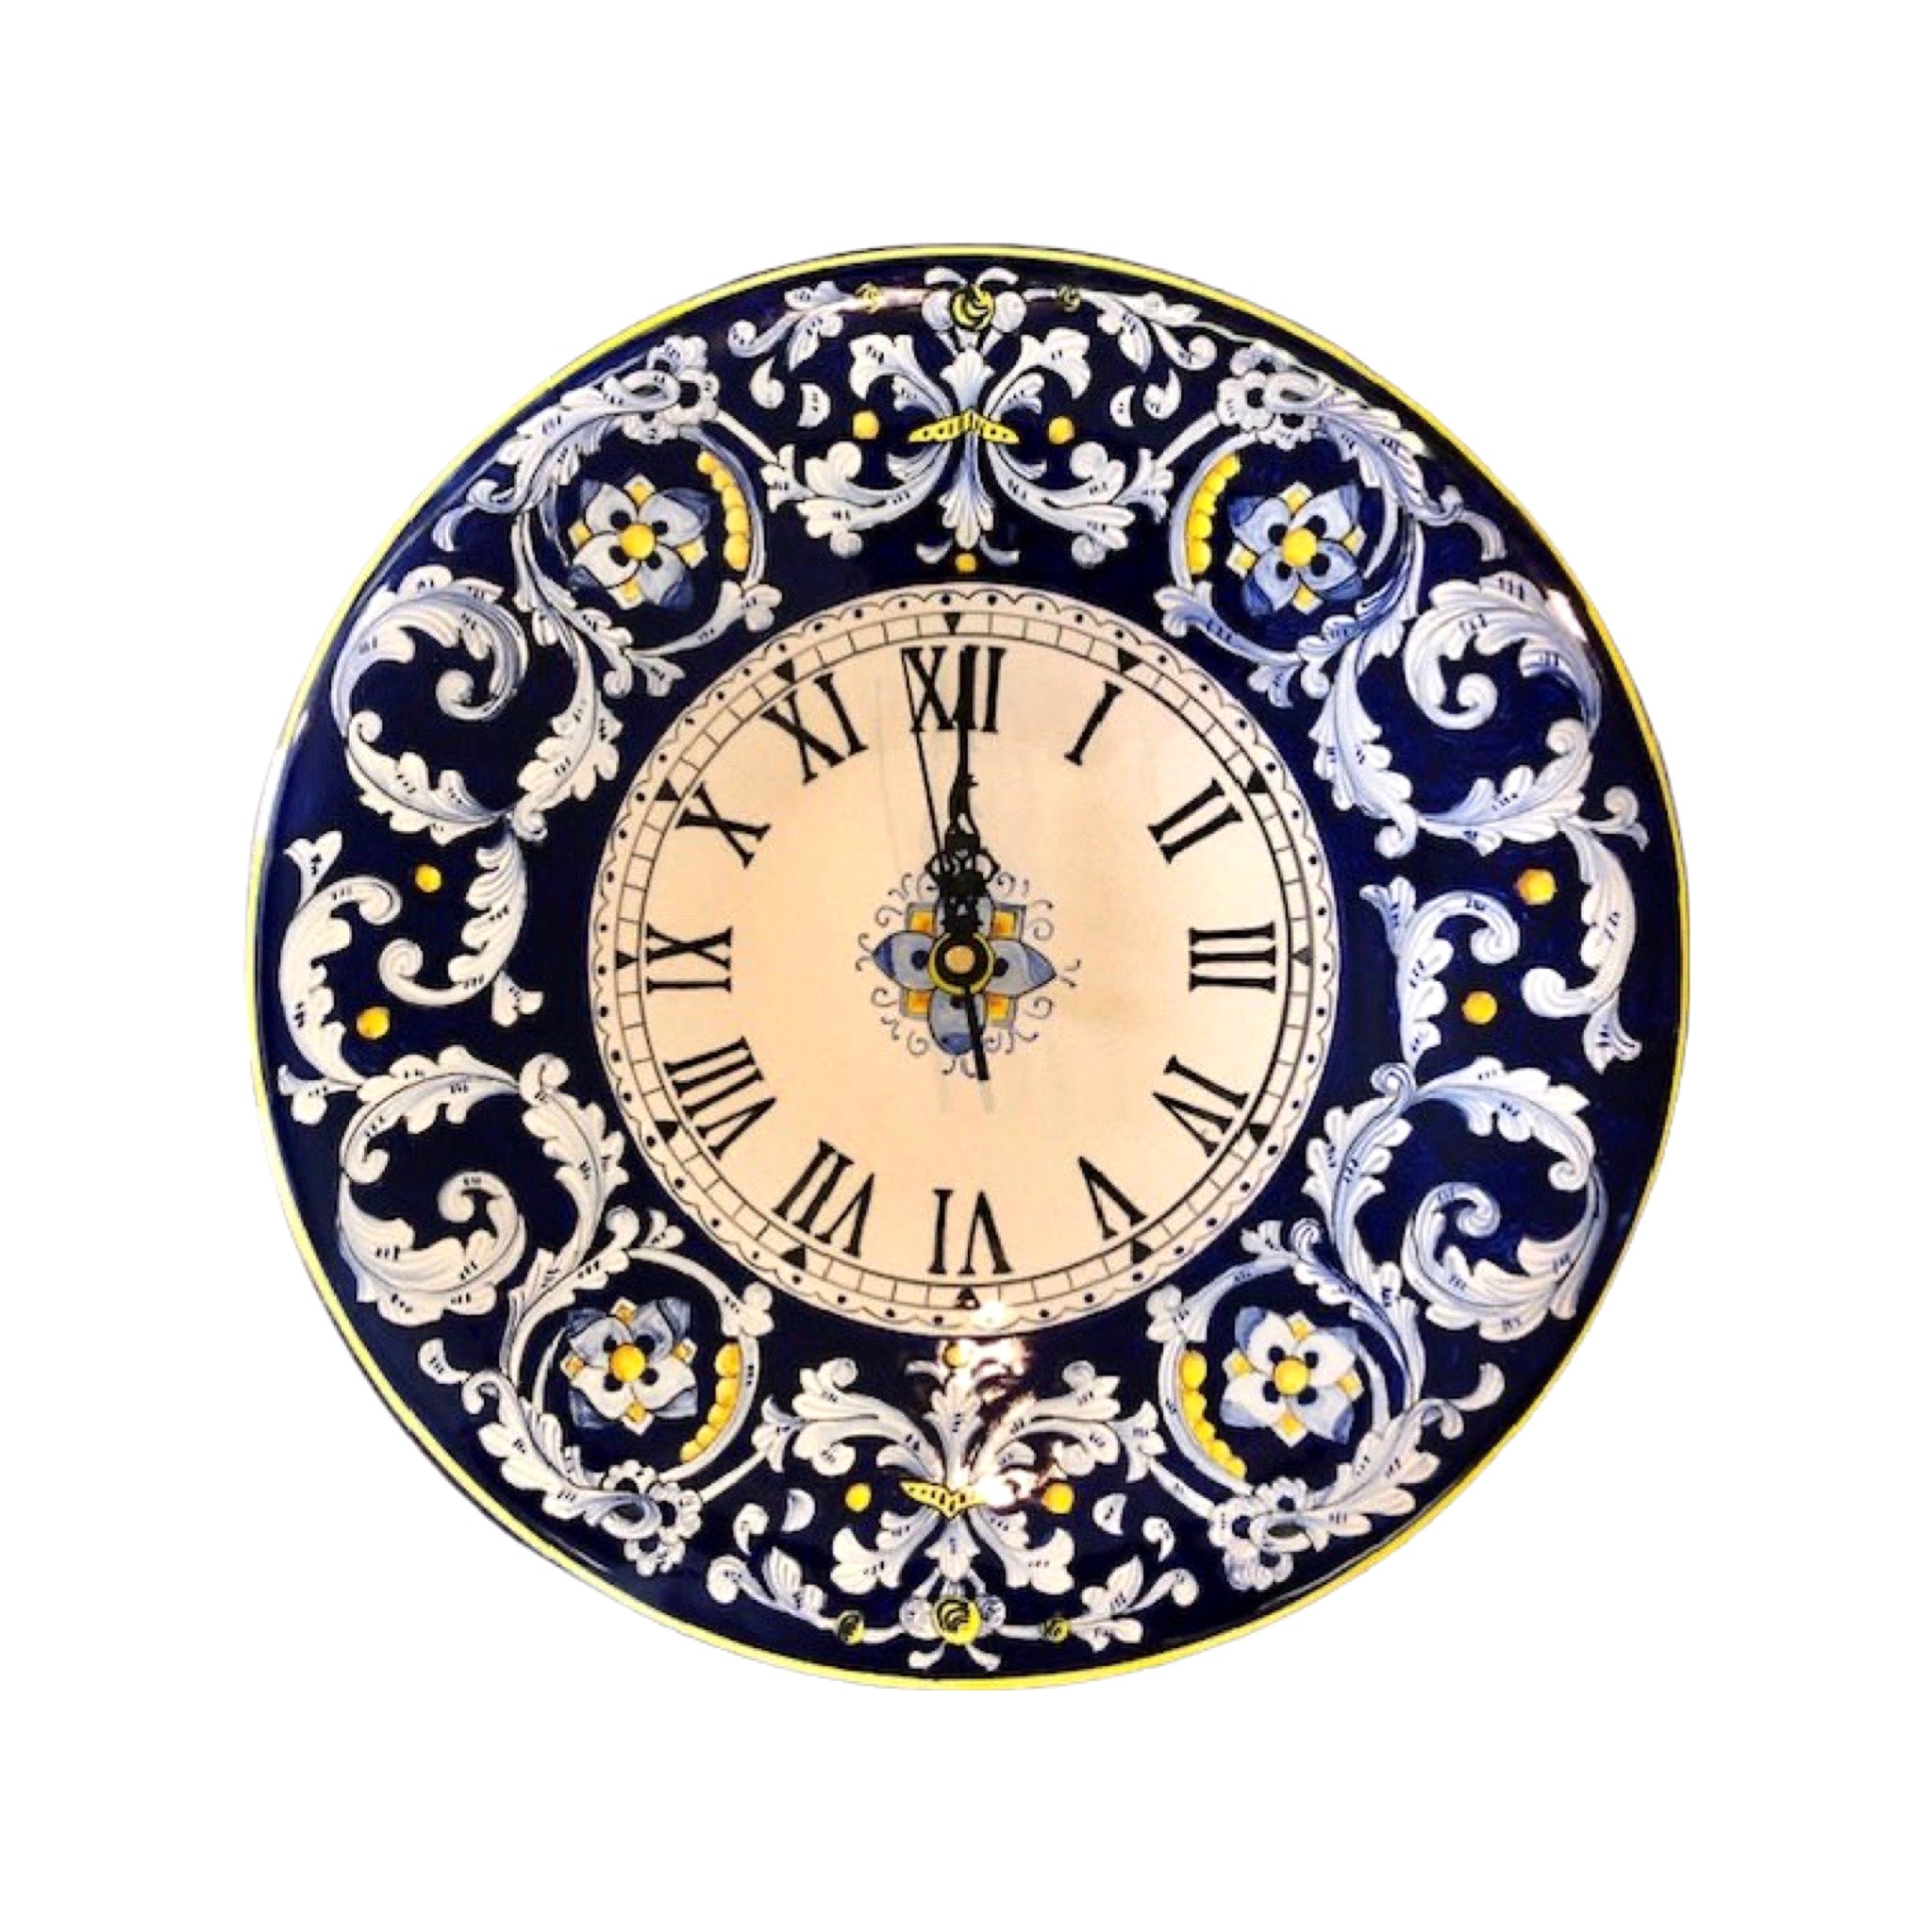 Antico Deruta - Wall Clock, ceramics, pottery, italian design, majolica, handmade, handcrafted, handpainted, home decor, kitchen art, home goods, deruta, majolica, Artisan, treasures, traditional art, modern art, gift ideas, style, SF, shop small business, artists, shop online, landmark store, legacy, one of a kind, limited edition, gift guide, gift shop, retail shop, decorations, shopping, italy, home staging, home decorating, home interiors